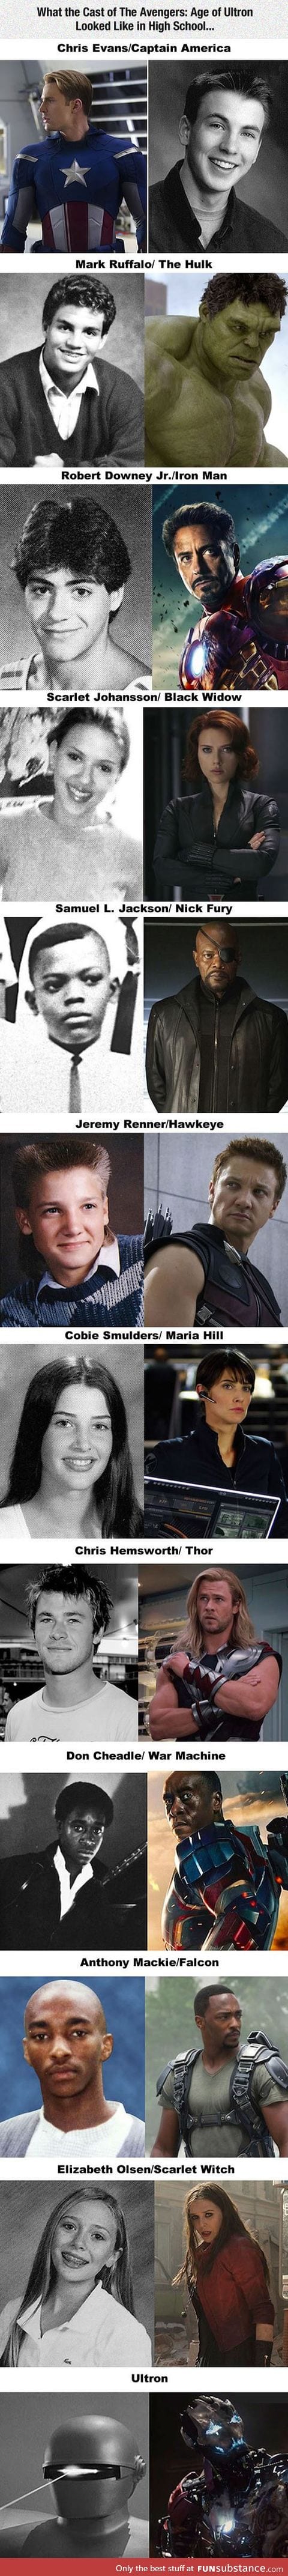 Cast of The Avengers In High School